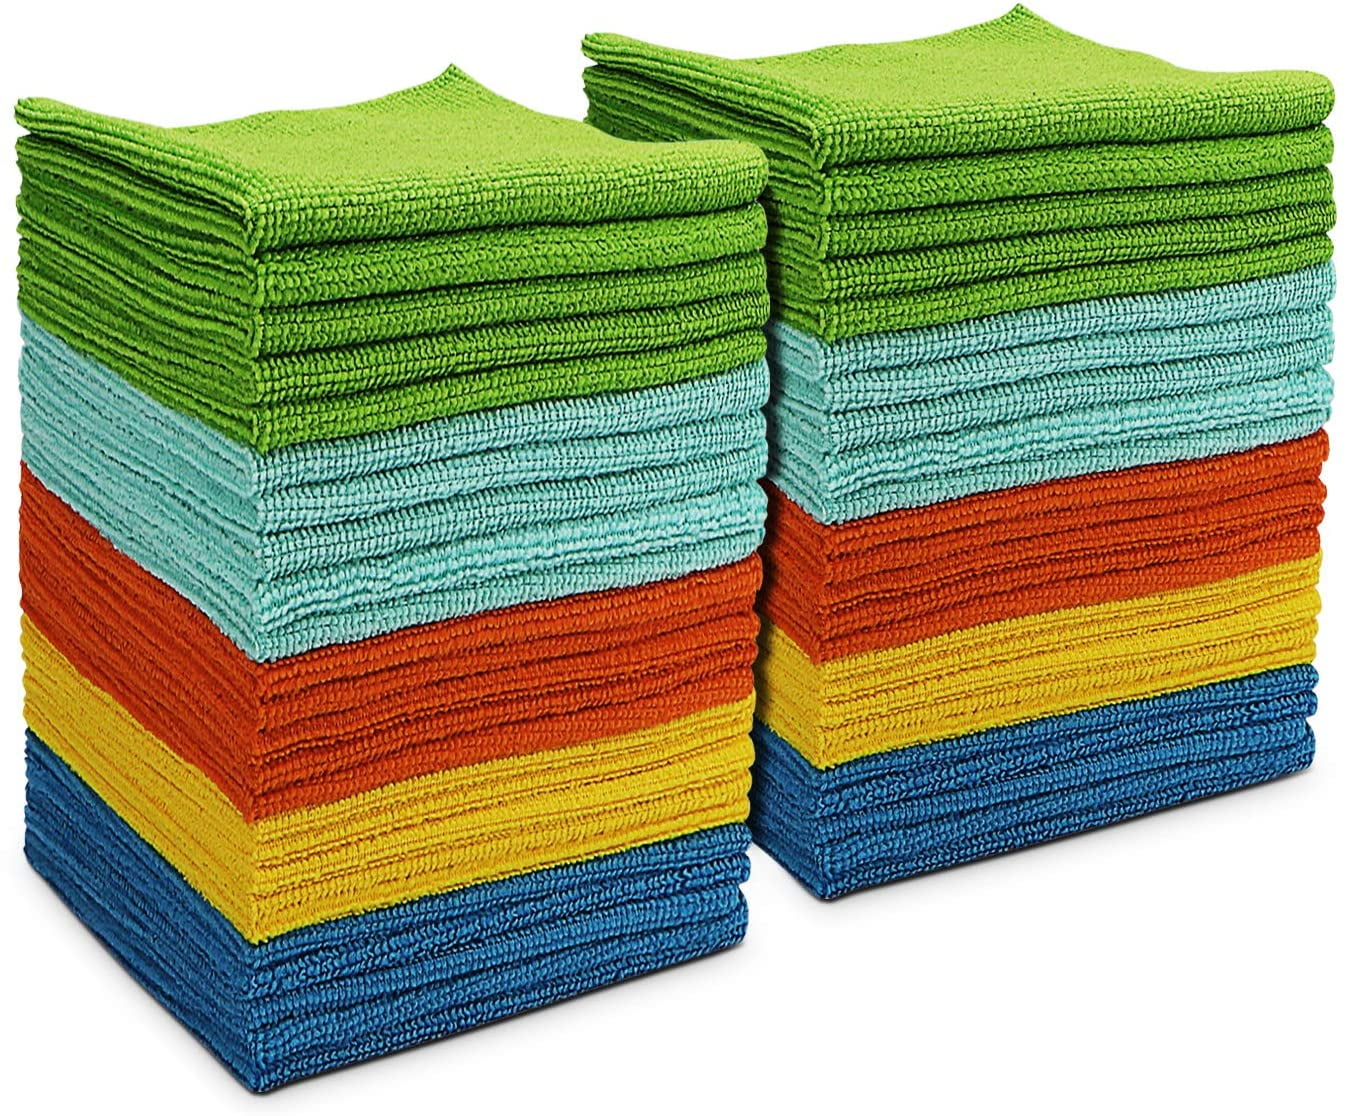 Multi-Functional Washable Reusable Cleaning Towels Chemical Free for House 12 x 12 Inch Lorpect Microfiber Cleaning Cloths Softer Window & Car, Kitchen 1 Pack